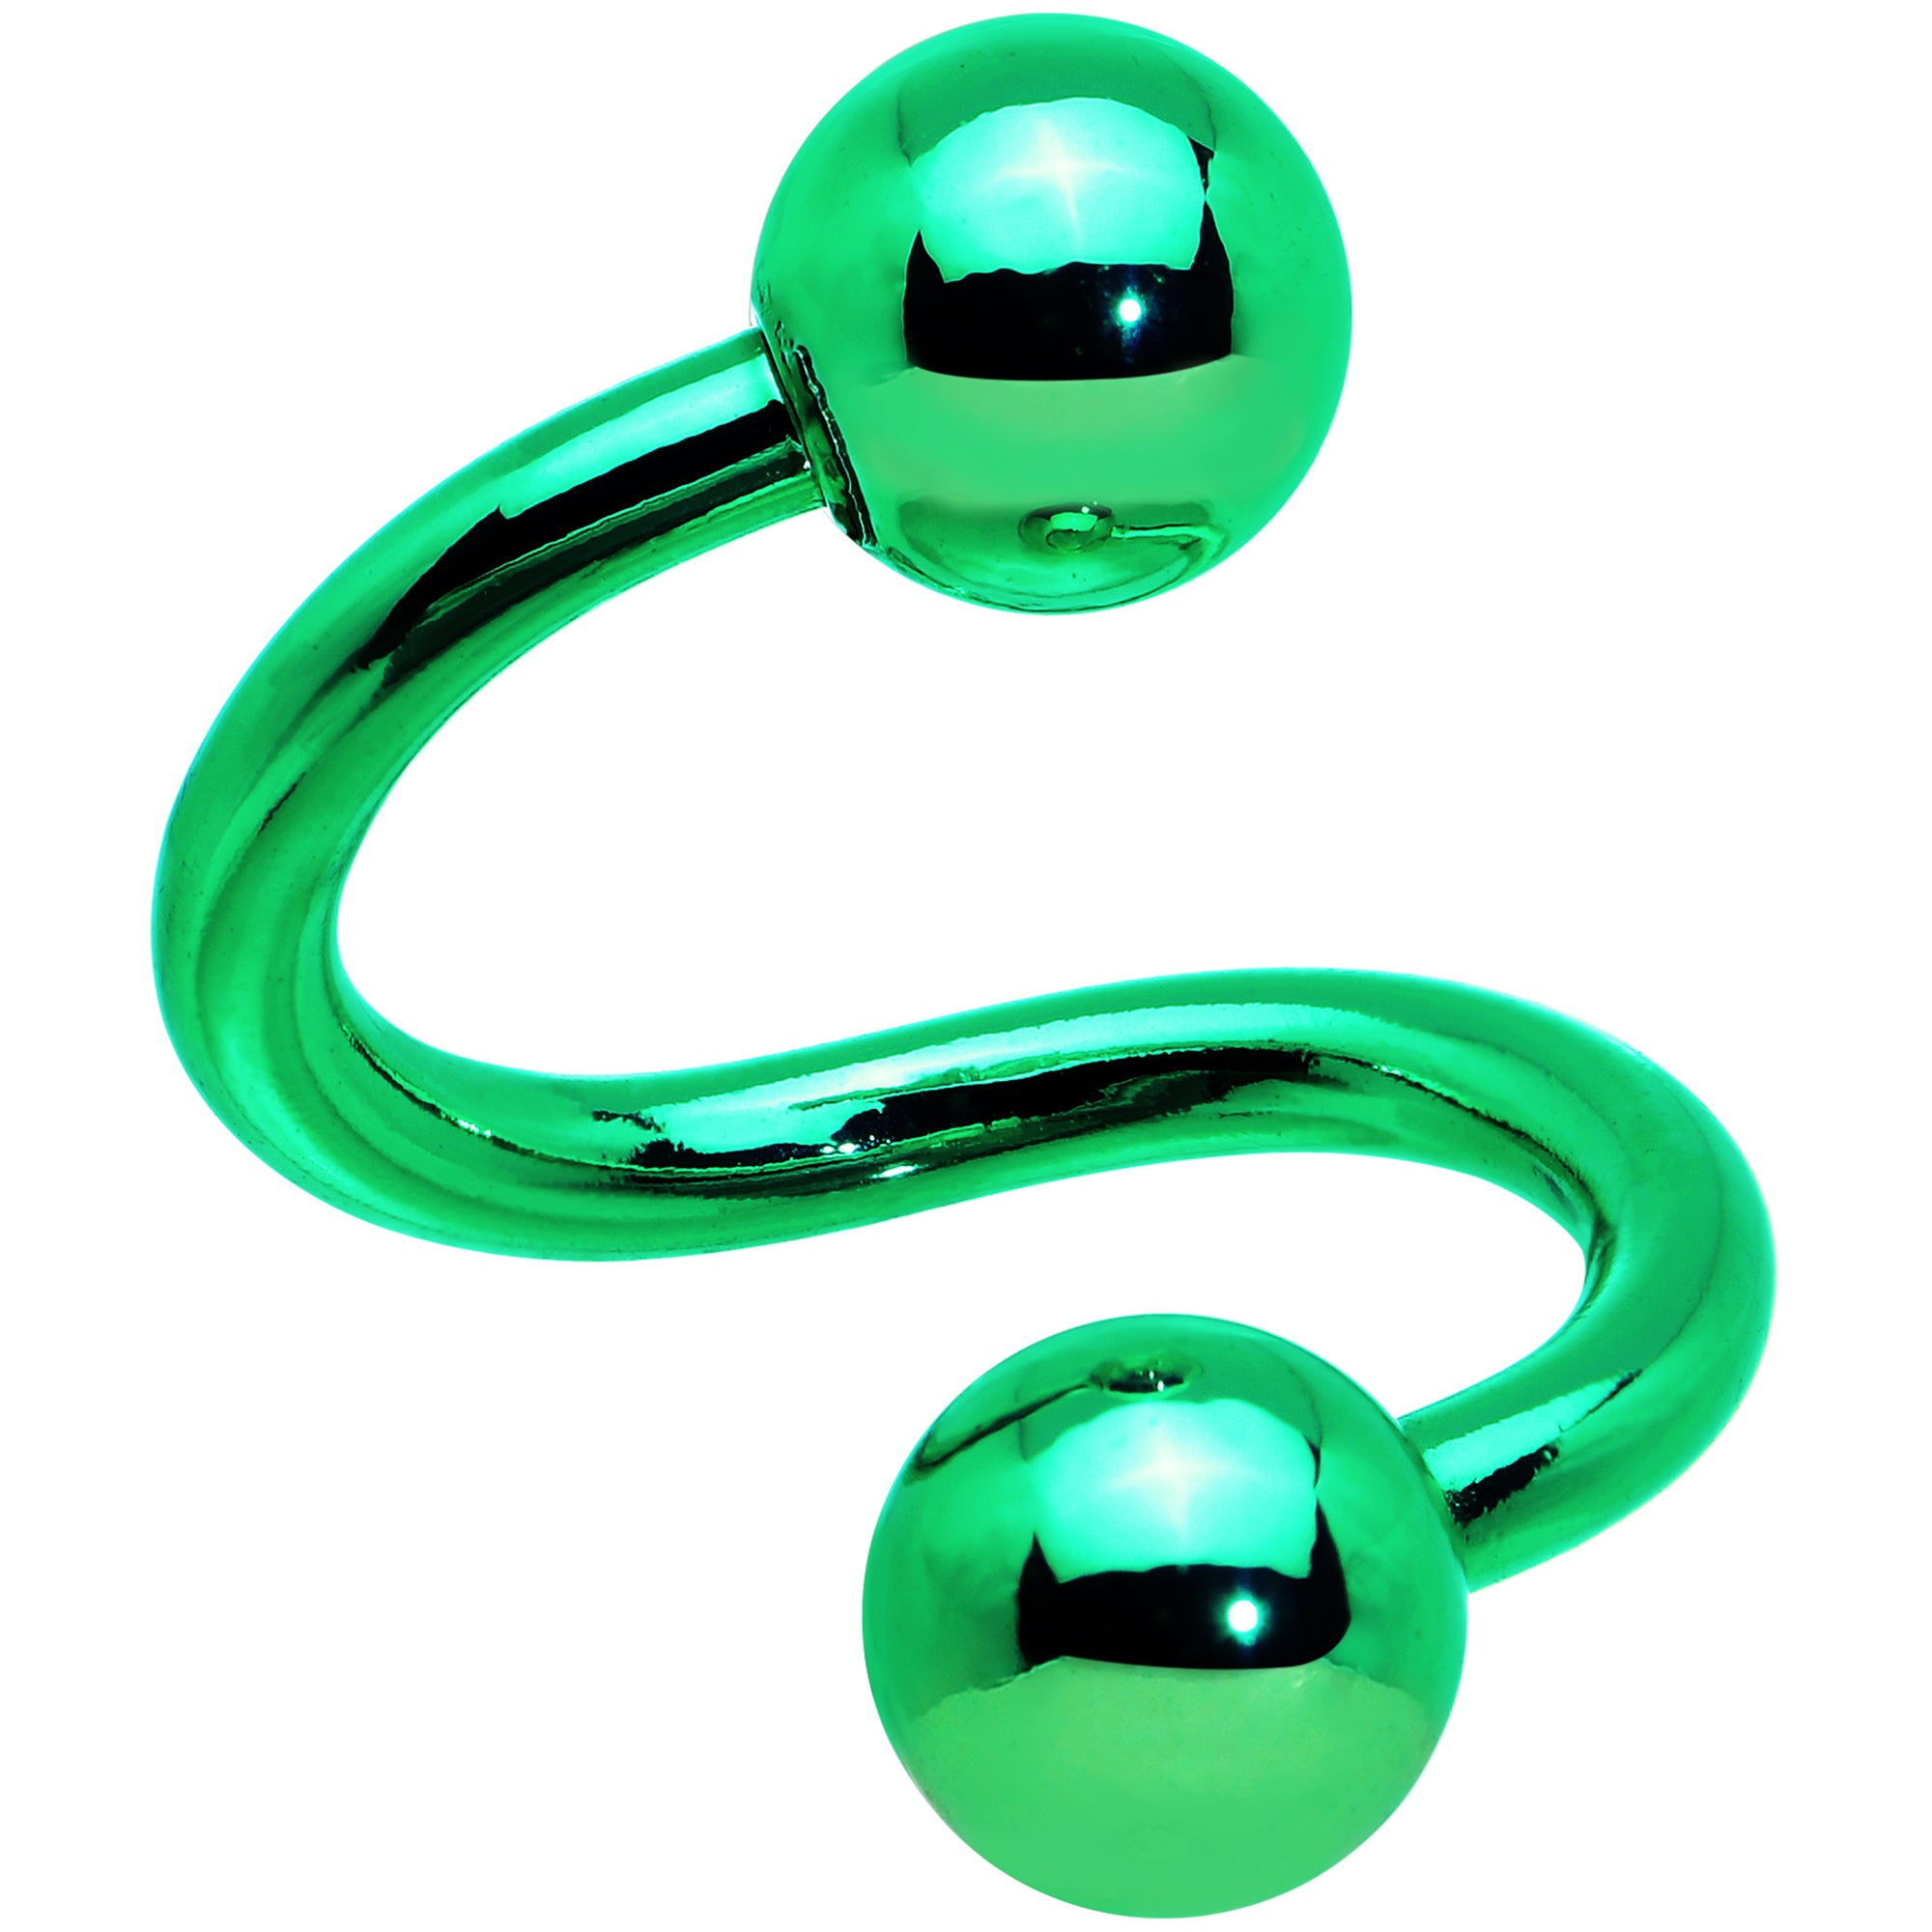 14 Gauge 7/16 Greenish Anodized Spiral Twister Belly Ring